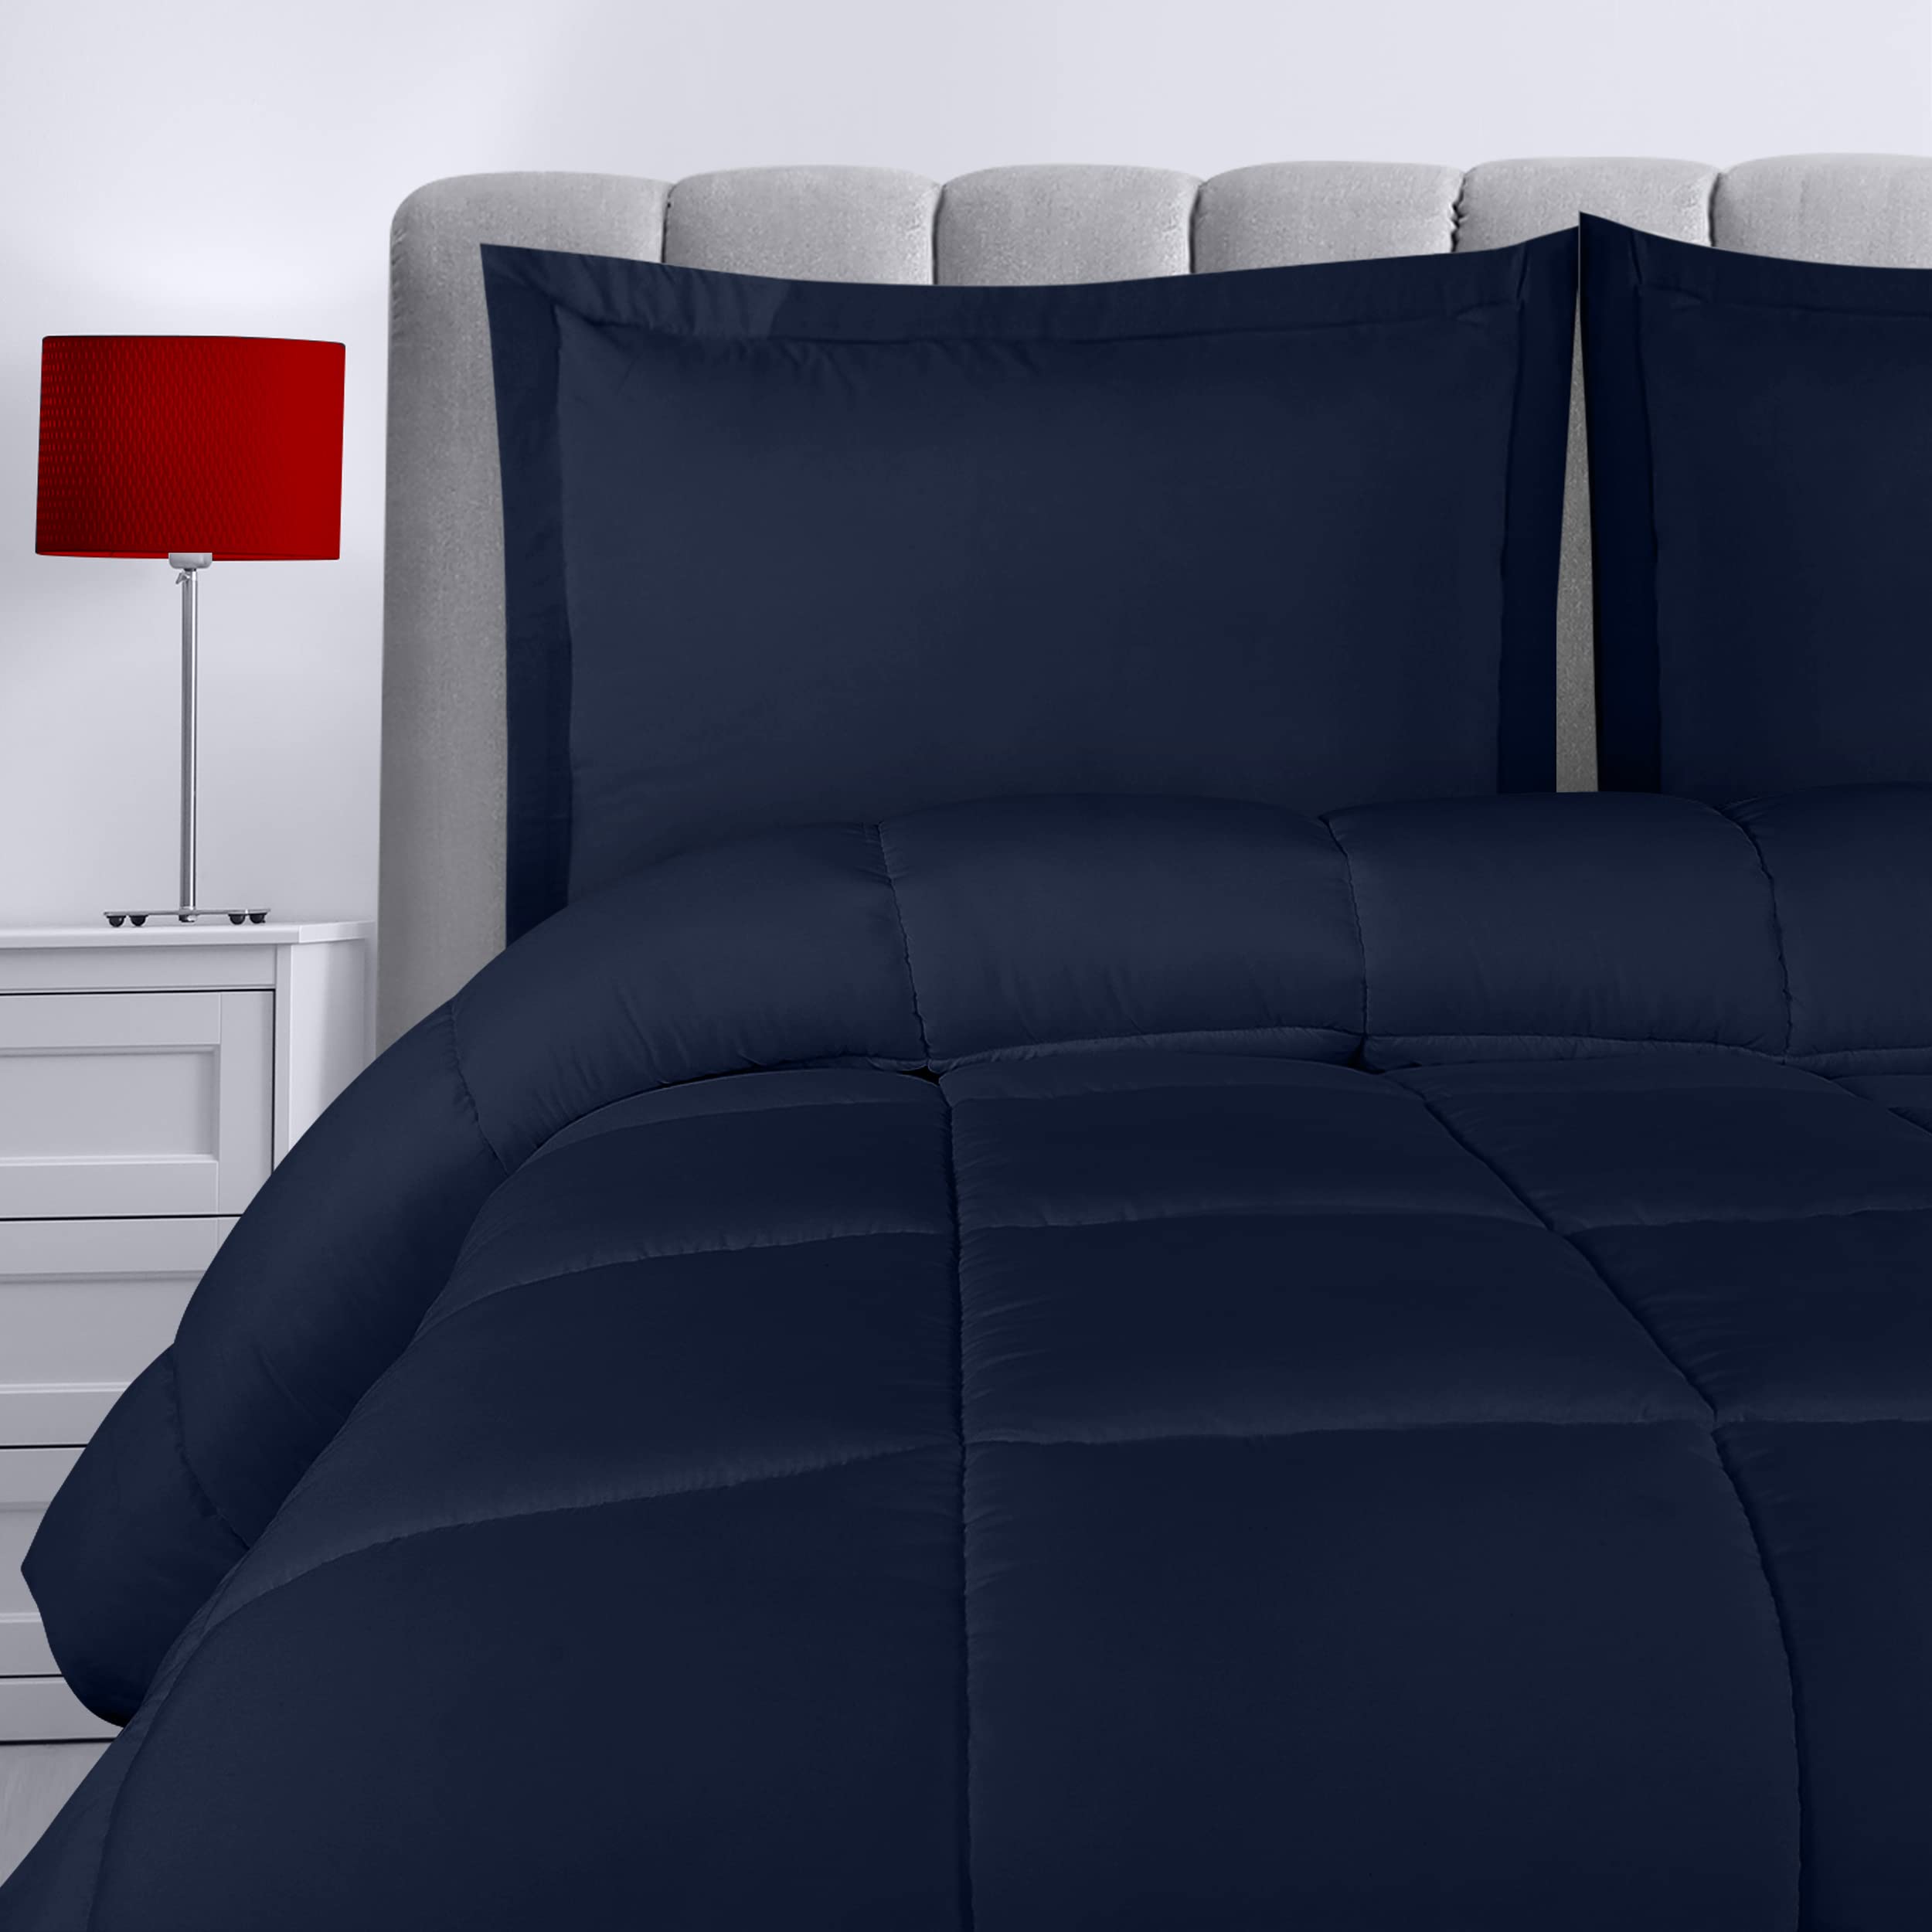 Book Cover Utopia Bedding King/California King Size Comforter Set with 2 Pillow Shams - Bedding Comforter Sets - Down Alternative Navy Comforter - Soft and Comfortable - Machine Washable Navy King